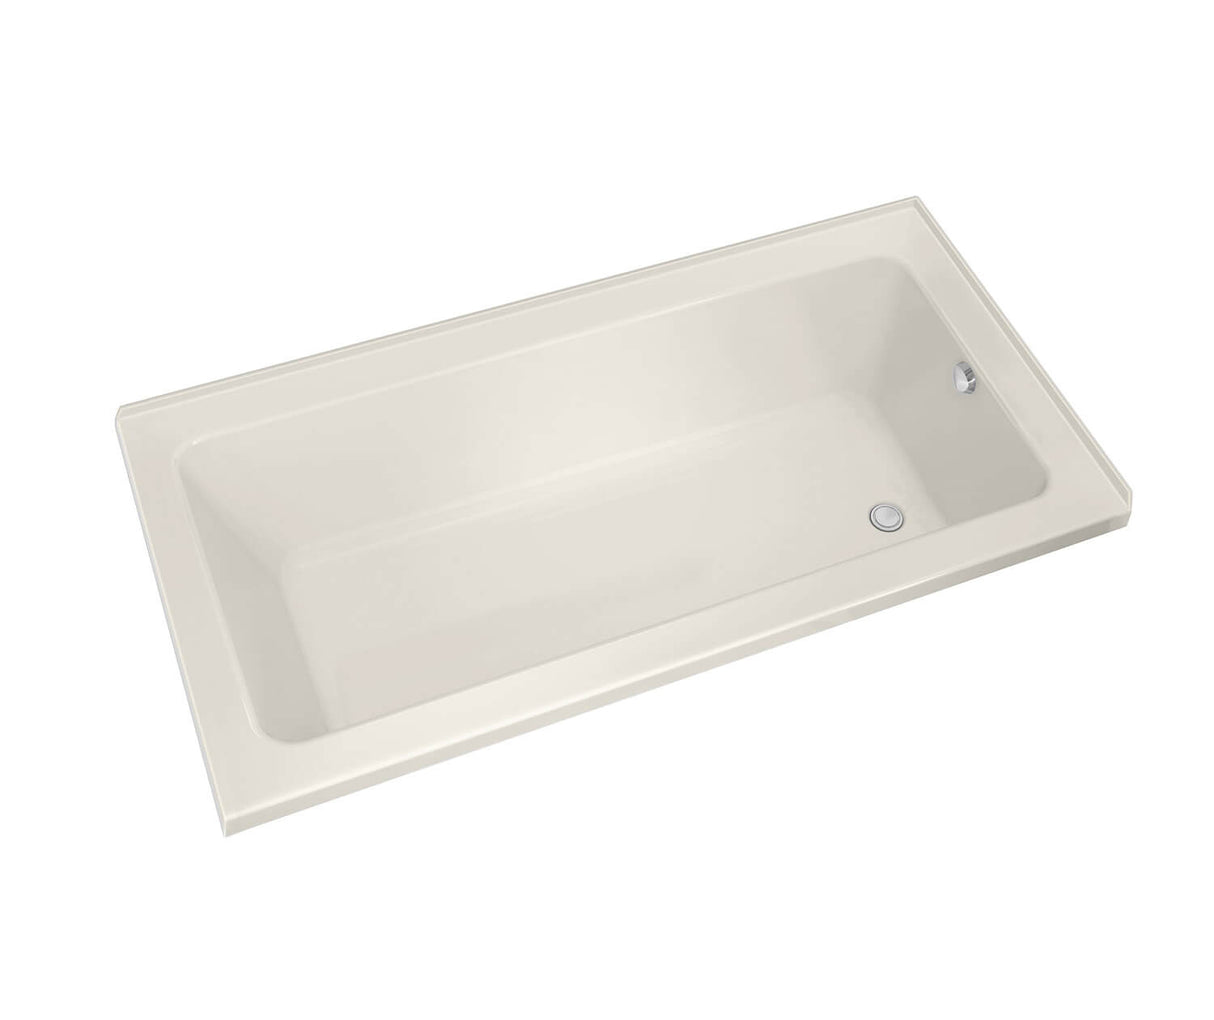 MAAX 106203-L-097-007 Pose 6032 IF Acrylic Corner Right Left-Hand Drain Combined Whirlpool & Aeroeffect Bathtub in Biscuit